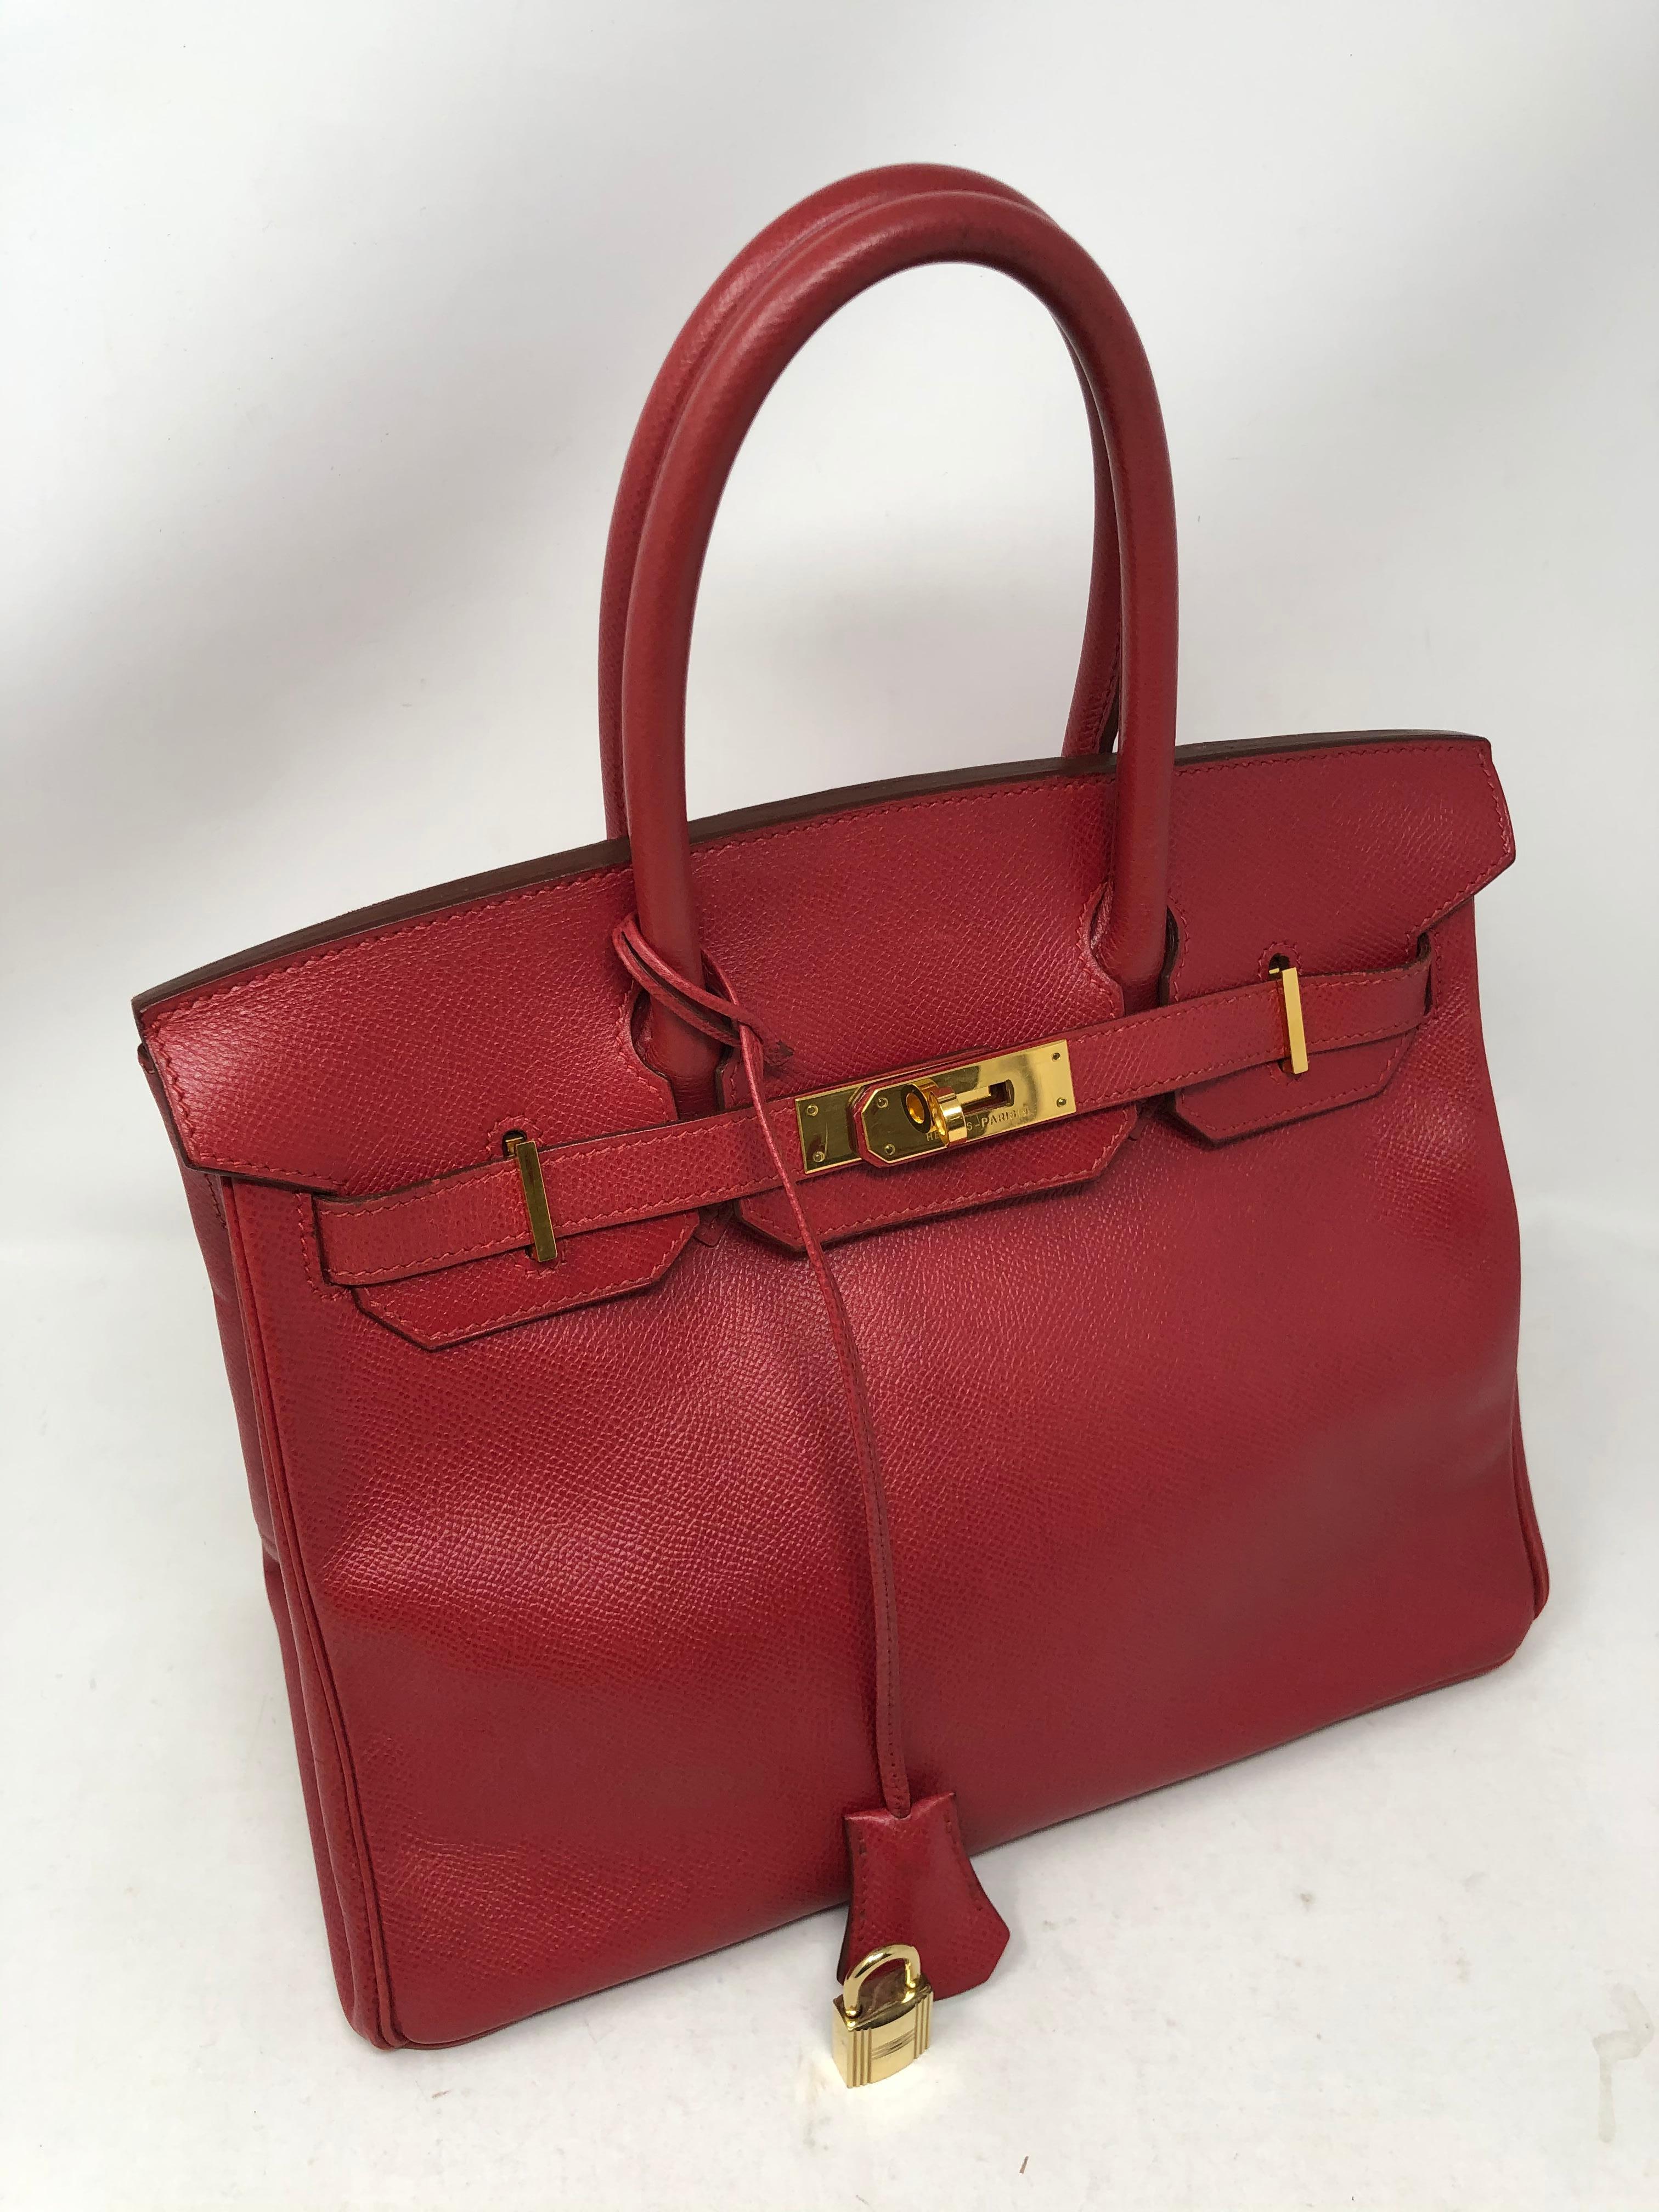 Hermes Red Birkin 30 with Gold Hardware. Vintage Courchevel leather. Vintage Birkin from 1995. Excellent condition. Has light wear on corners. Please see all photos. Most wanted size 30. Very hard to find. Interior is clean. Includes clochette and